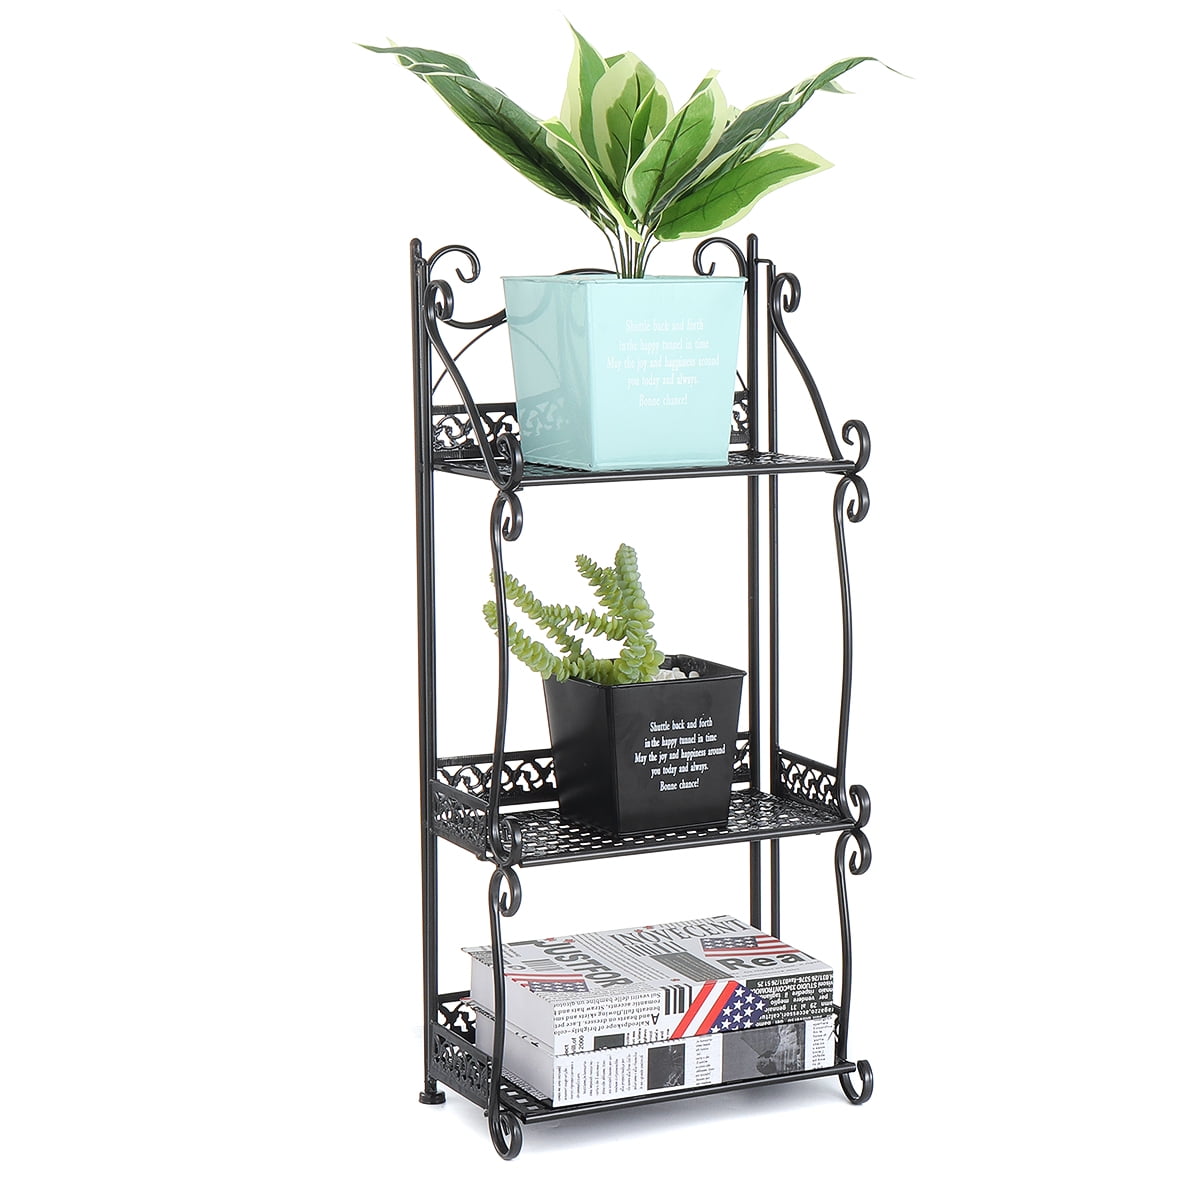 SAYFUT 3 Tier Metal Plant Stand Iron Sheet with Strong Load-Bearing Multi-Function Storage Rack Flower Display Indoor and Outdoor Home Organizer for Balcony Living Room Kitchen Walmart.com